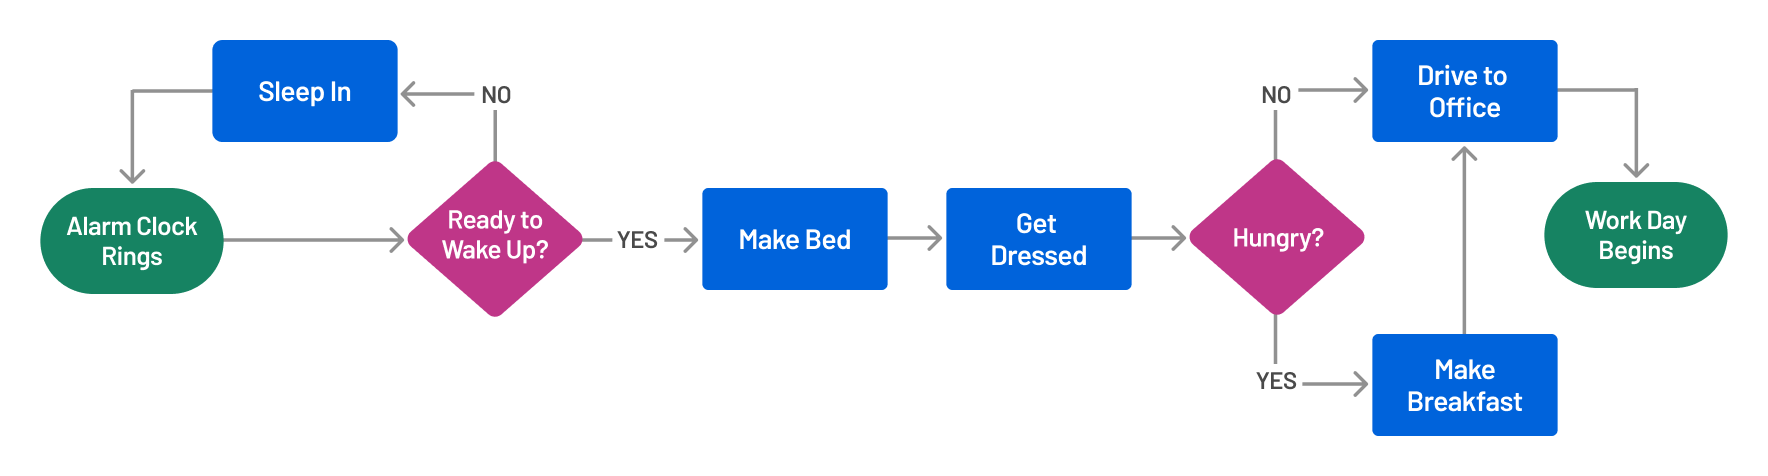 User flow showing the decisions of someone getting ready for work